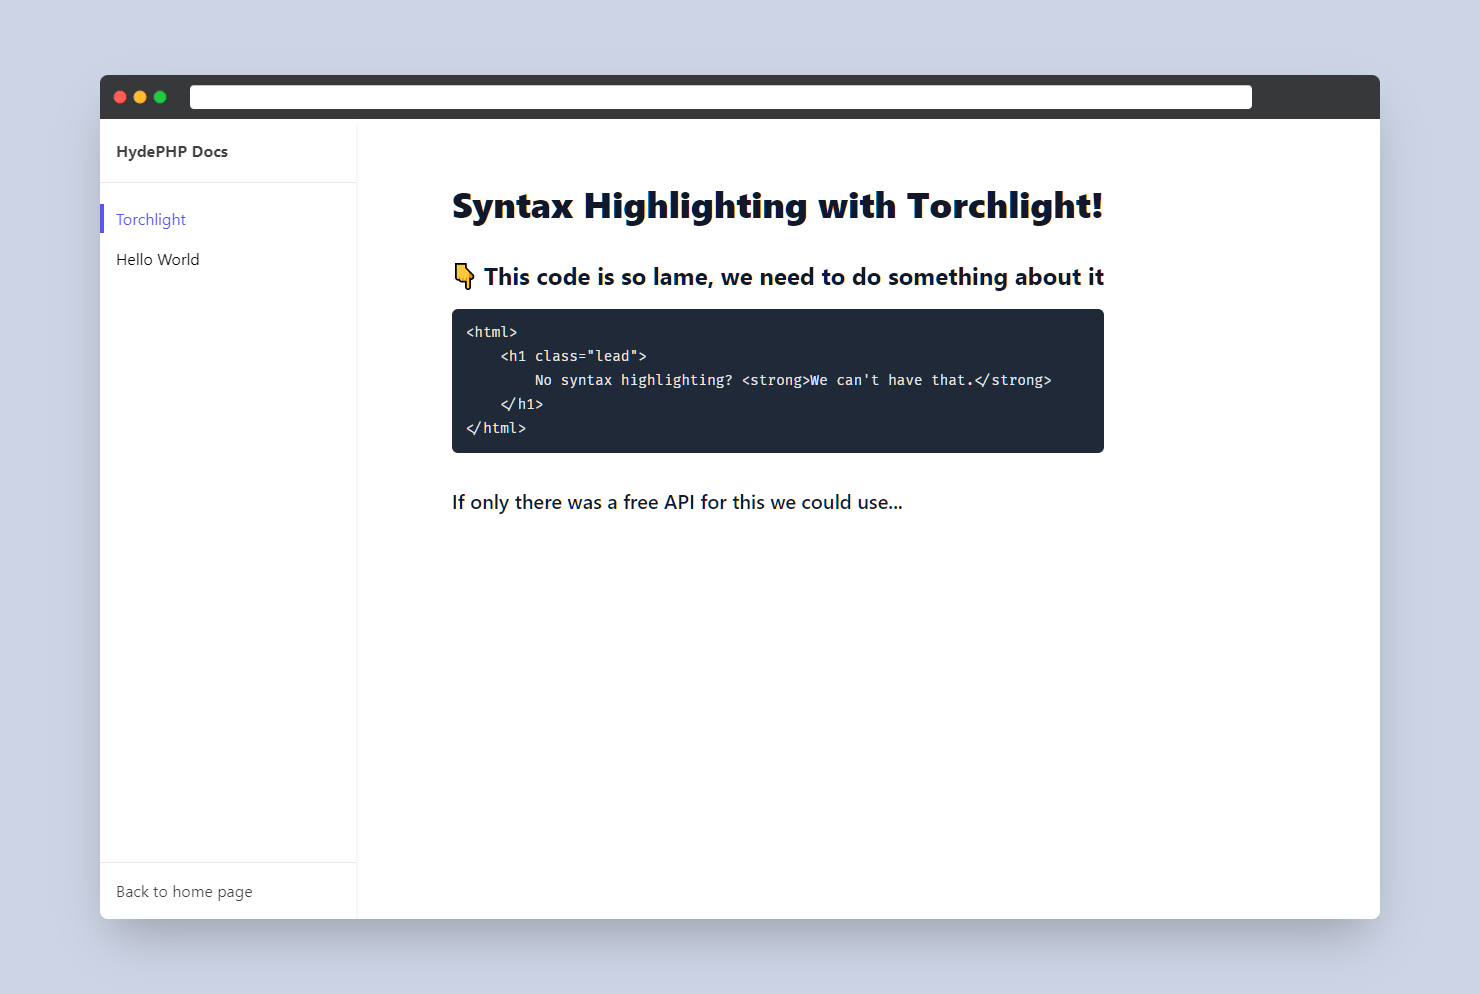 Screenshot of the documentation page with no syntax highlighting